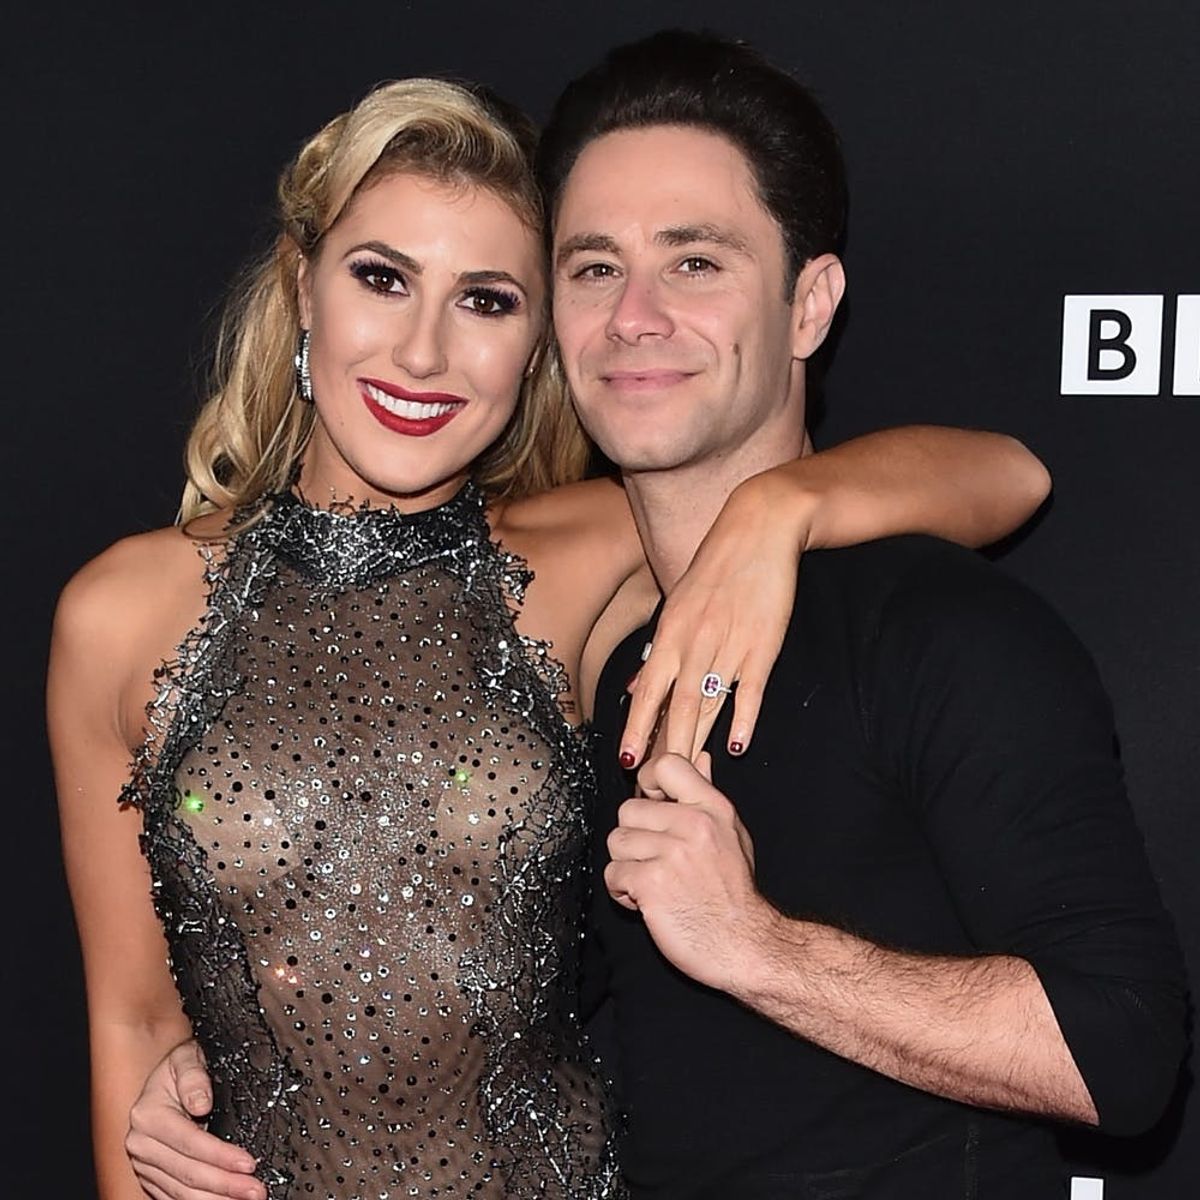 ‘DWTS’ Pros Emma Slater and Sasha Farber Are Married!